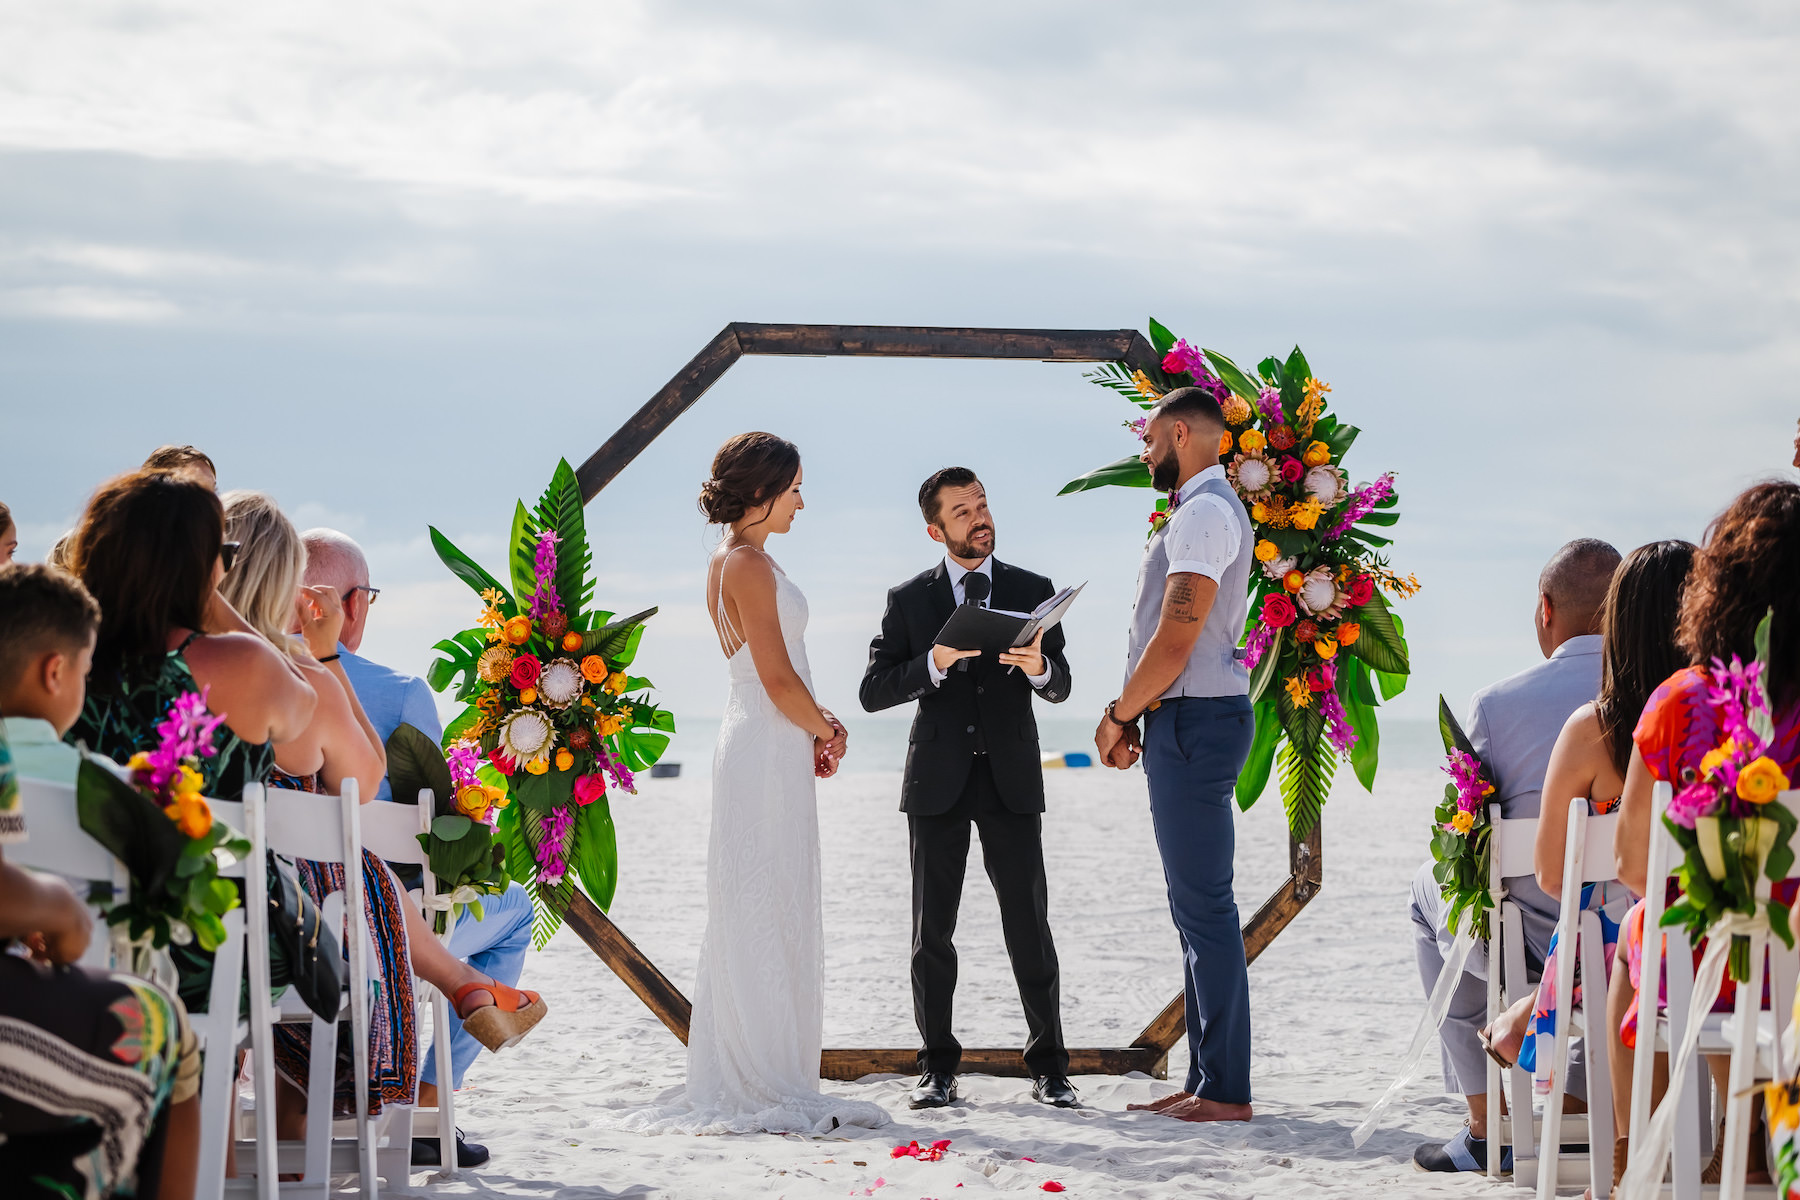 Clearwater Beach Bride and Groom Exchanging Wedding Ceremony Vows Waterfront, Geometric Octagonal Wooden Arch with Tropical King Proteas, Orange, Pink and Red Roses, Purple Orchids, Palm Fronds and Monstera Palm Leaves Floral Arrangements on Beach Portrait | Tampa Bay Waterfront Beach Hotel Wedding Venue Hilton Clearwater Beach